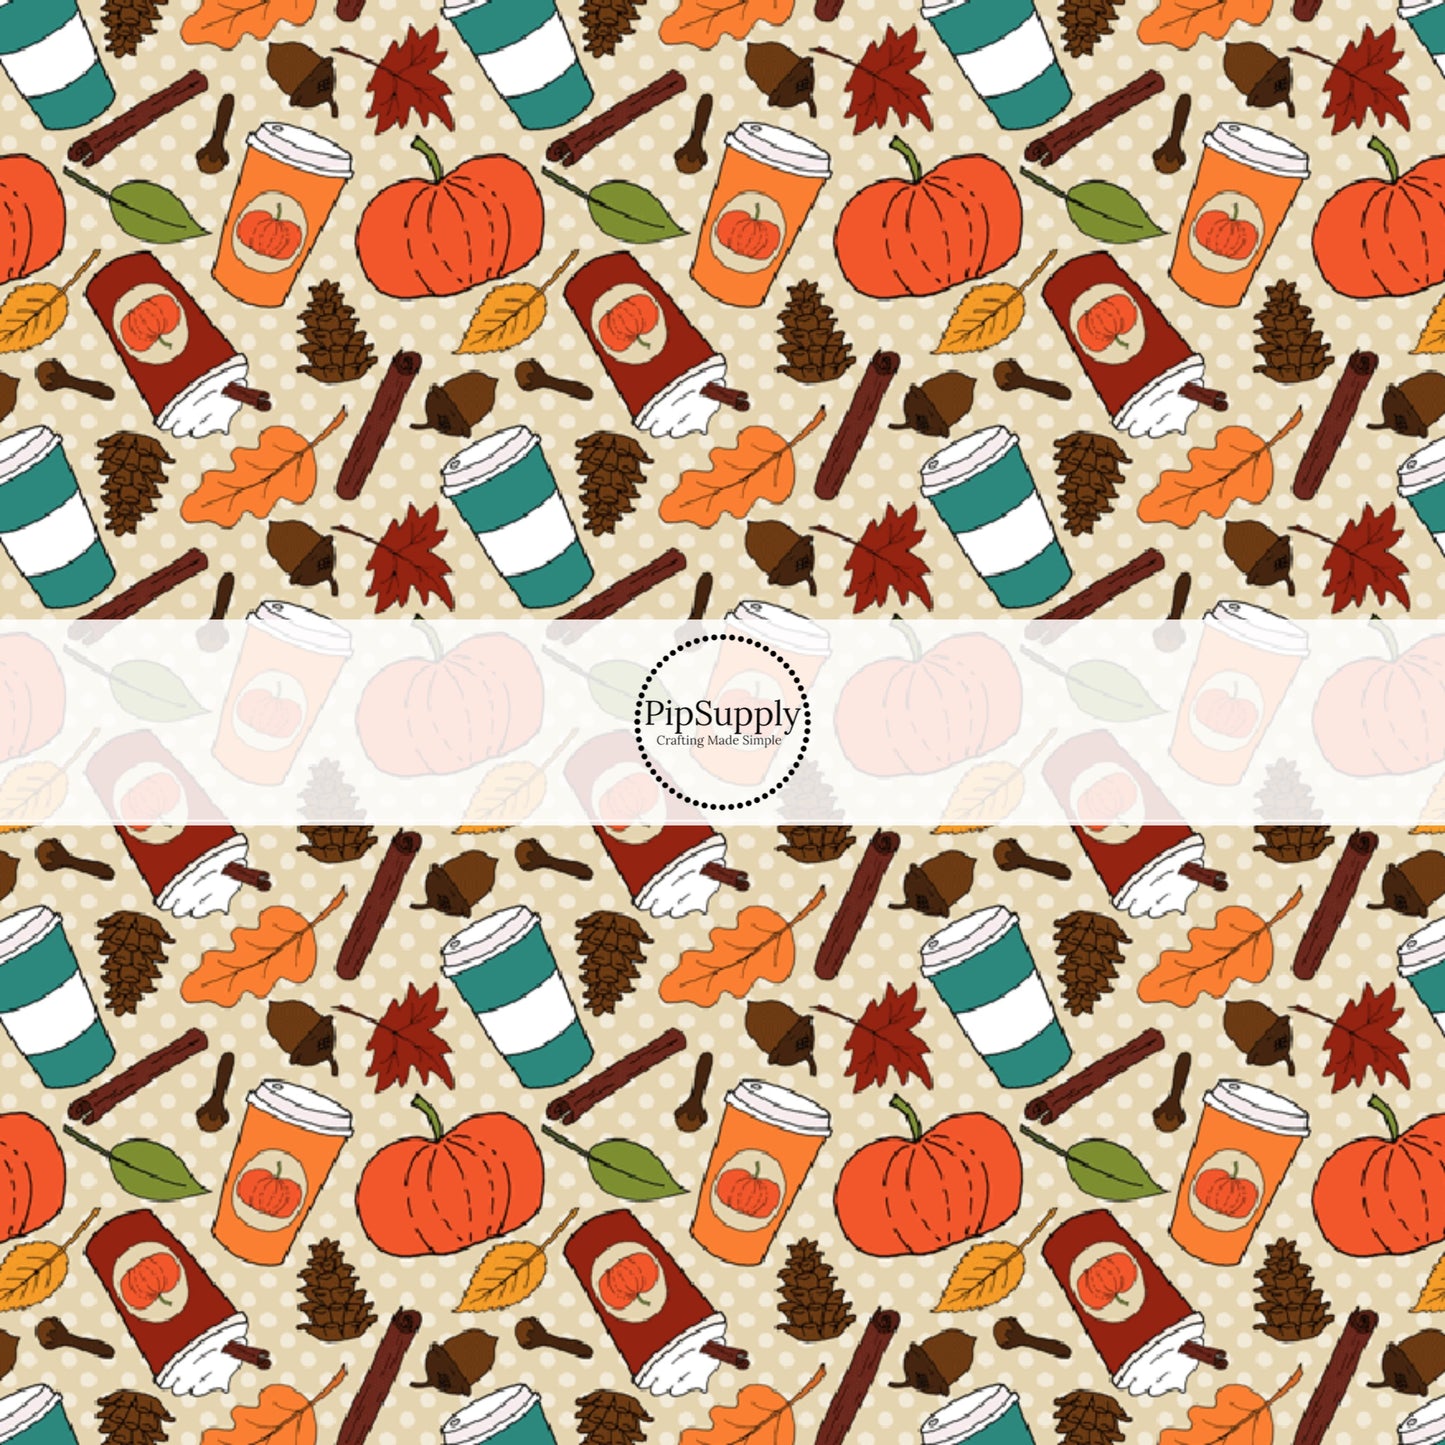 These fall pumpkin themed cream fabric by the yard features pumpkin spice cups surrounded by pumpkins and leaves. This fun fall themed fabric can be used for all your sewing and crafting needs! 